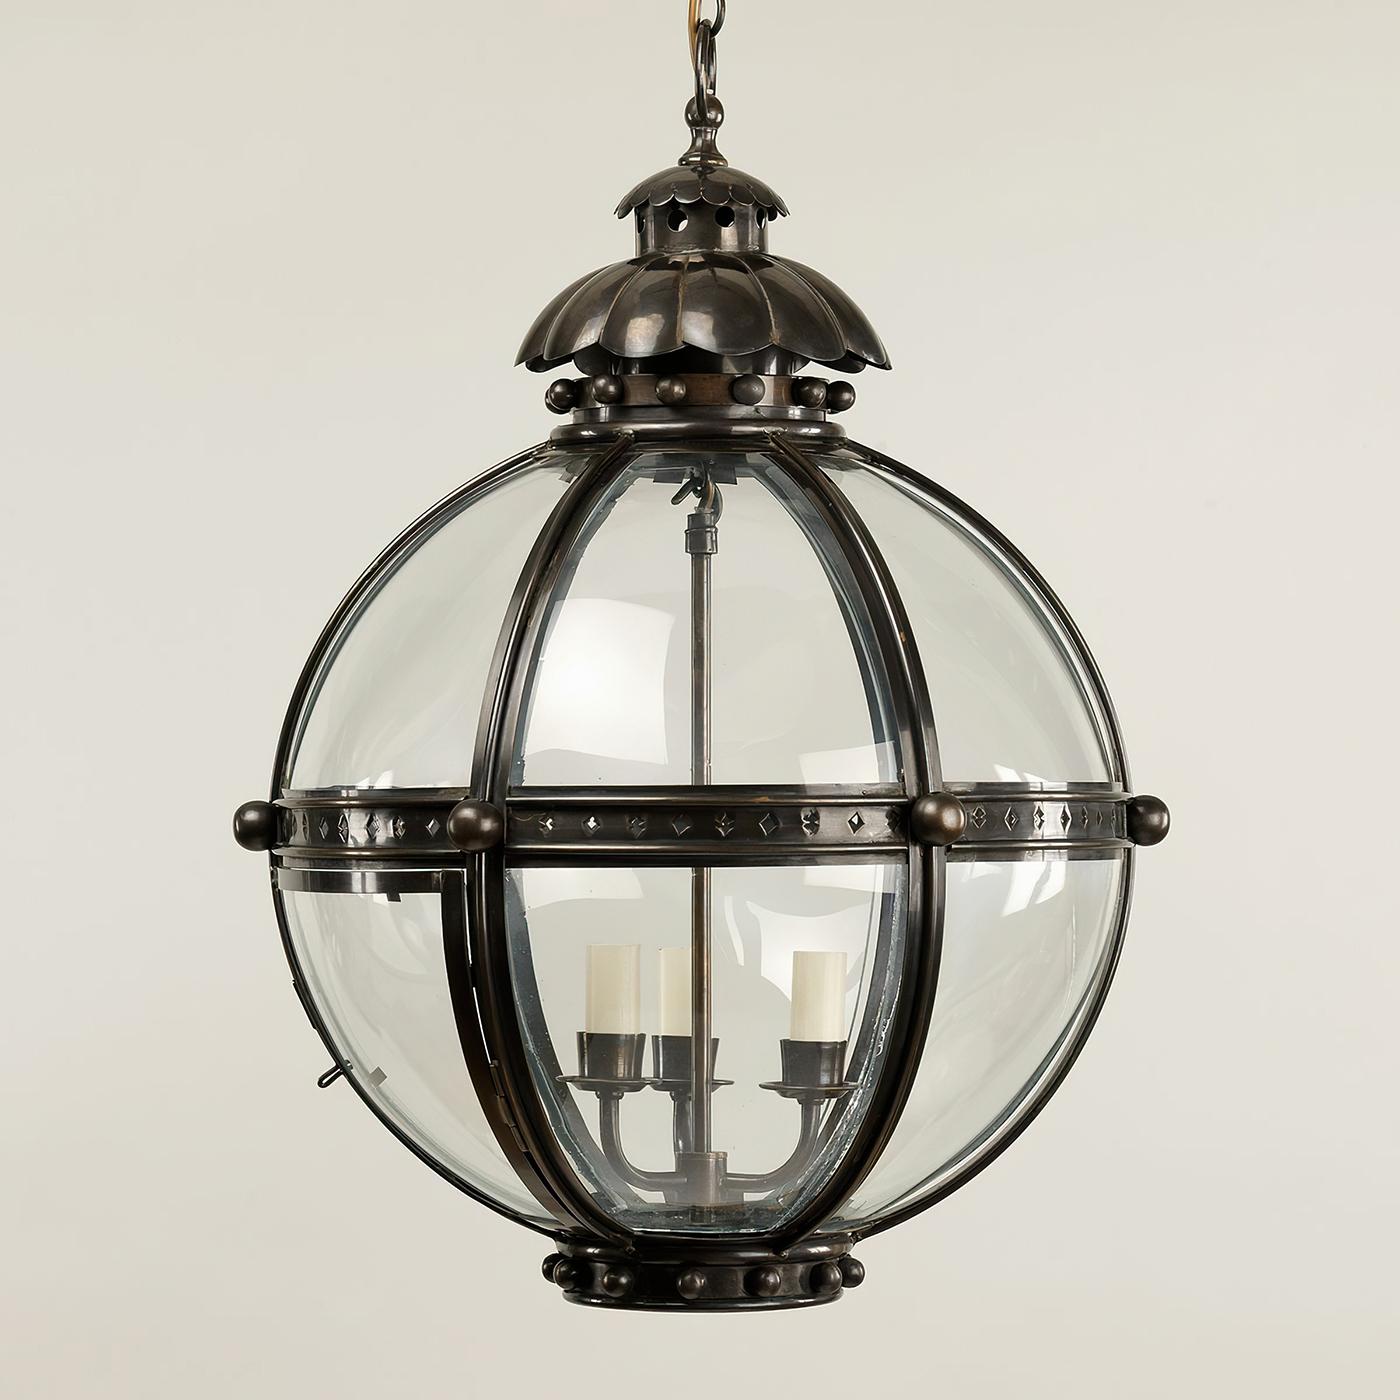 The Globe Lantern is based on a similar 19th-century antique. The globe shape of the fixture emanates strength and is united by the solid bronzed brass finials and acanthus top.

The lantern is hand-fabricated from bronzed brass and curved glass